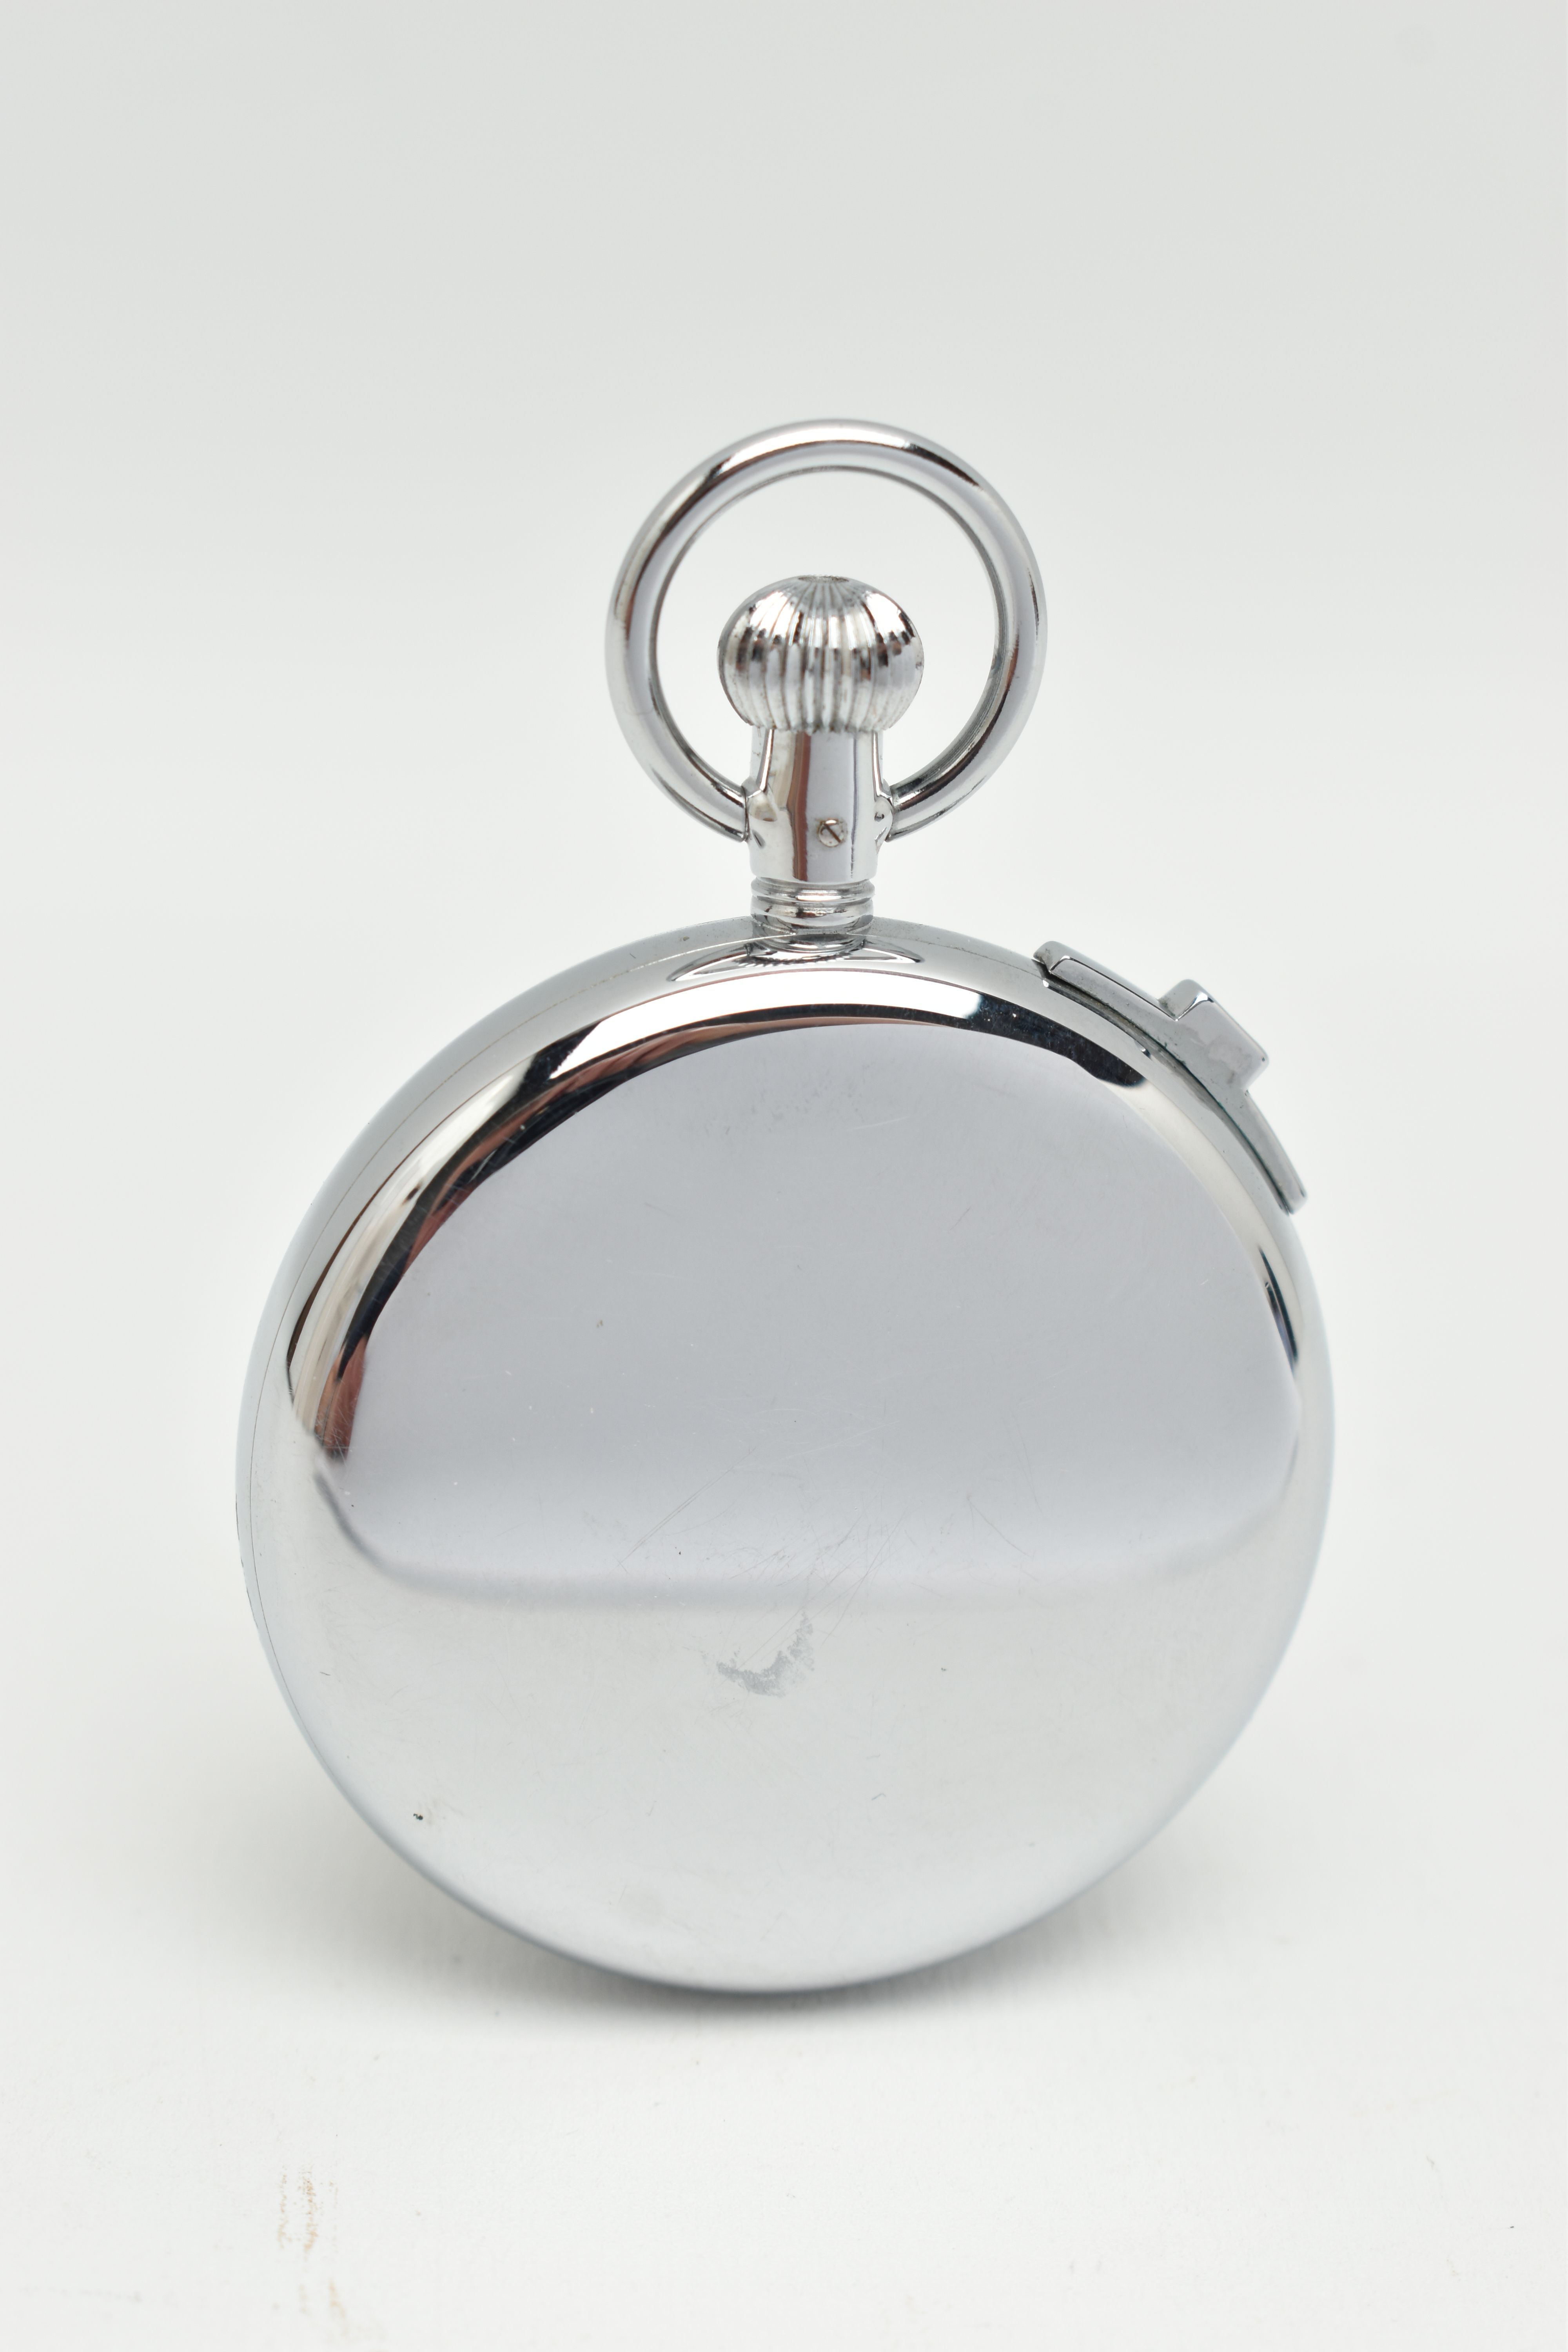 A CAMERER CUSS LONDON INCABLOC CHROME CASED STOPWATCH, white painted dial marked in 10 second - Image 2 of 4